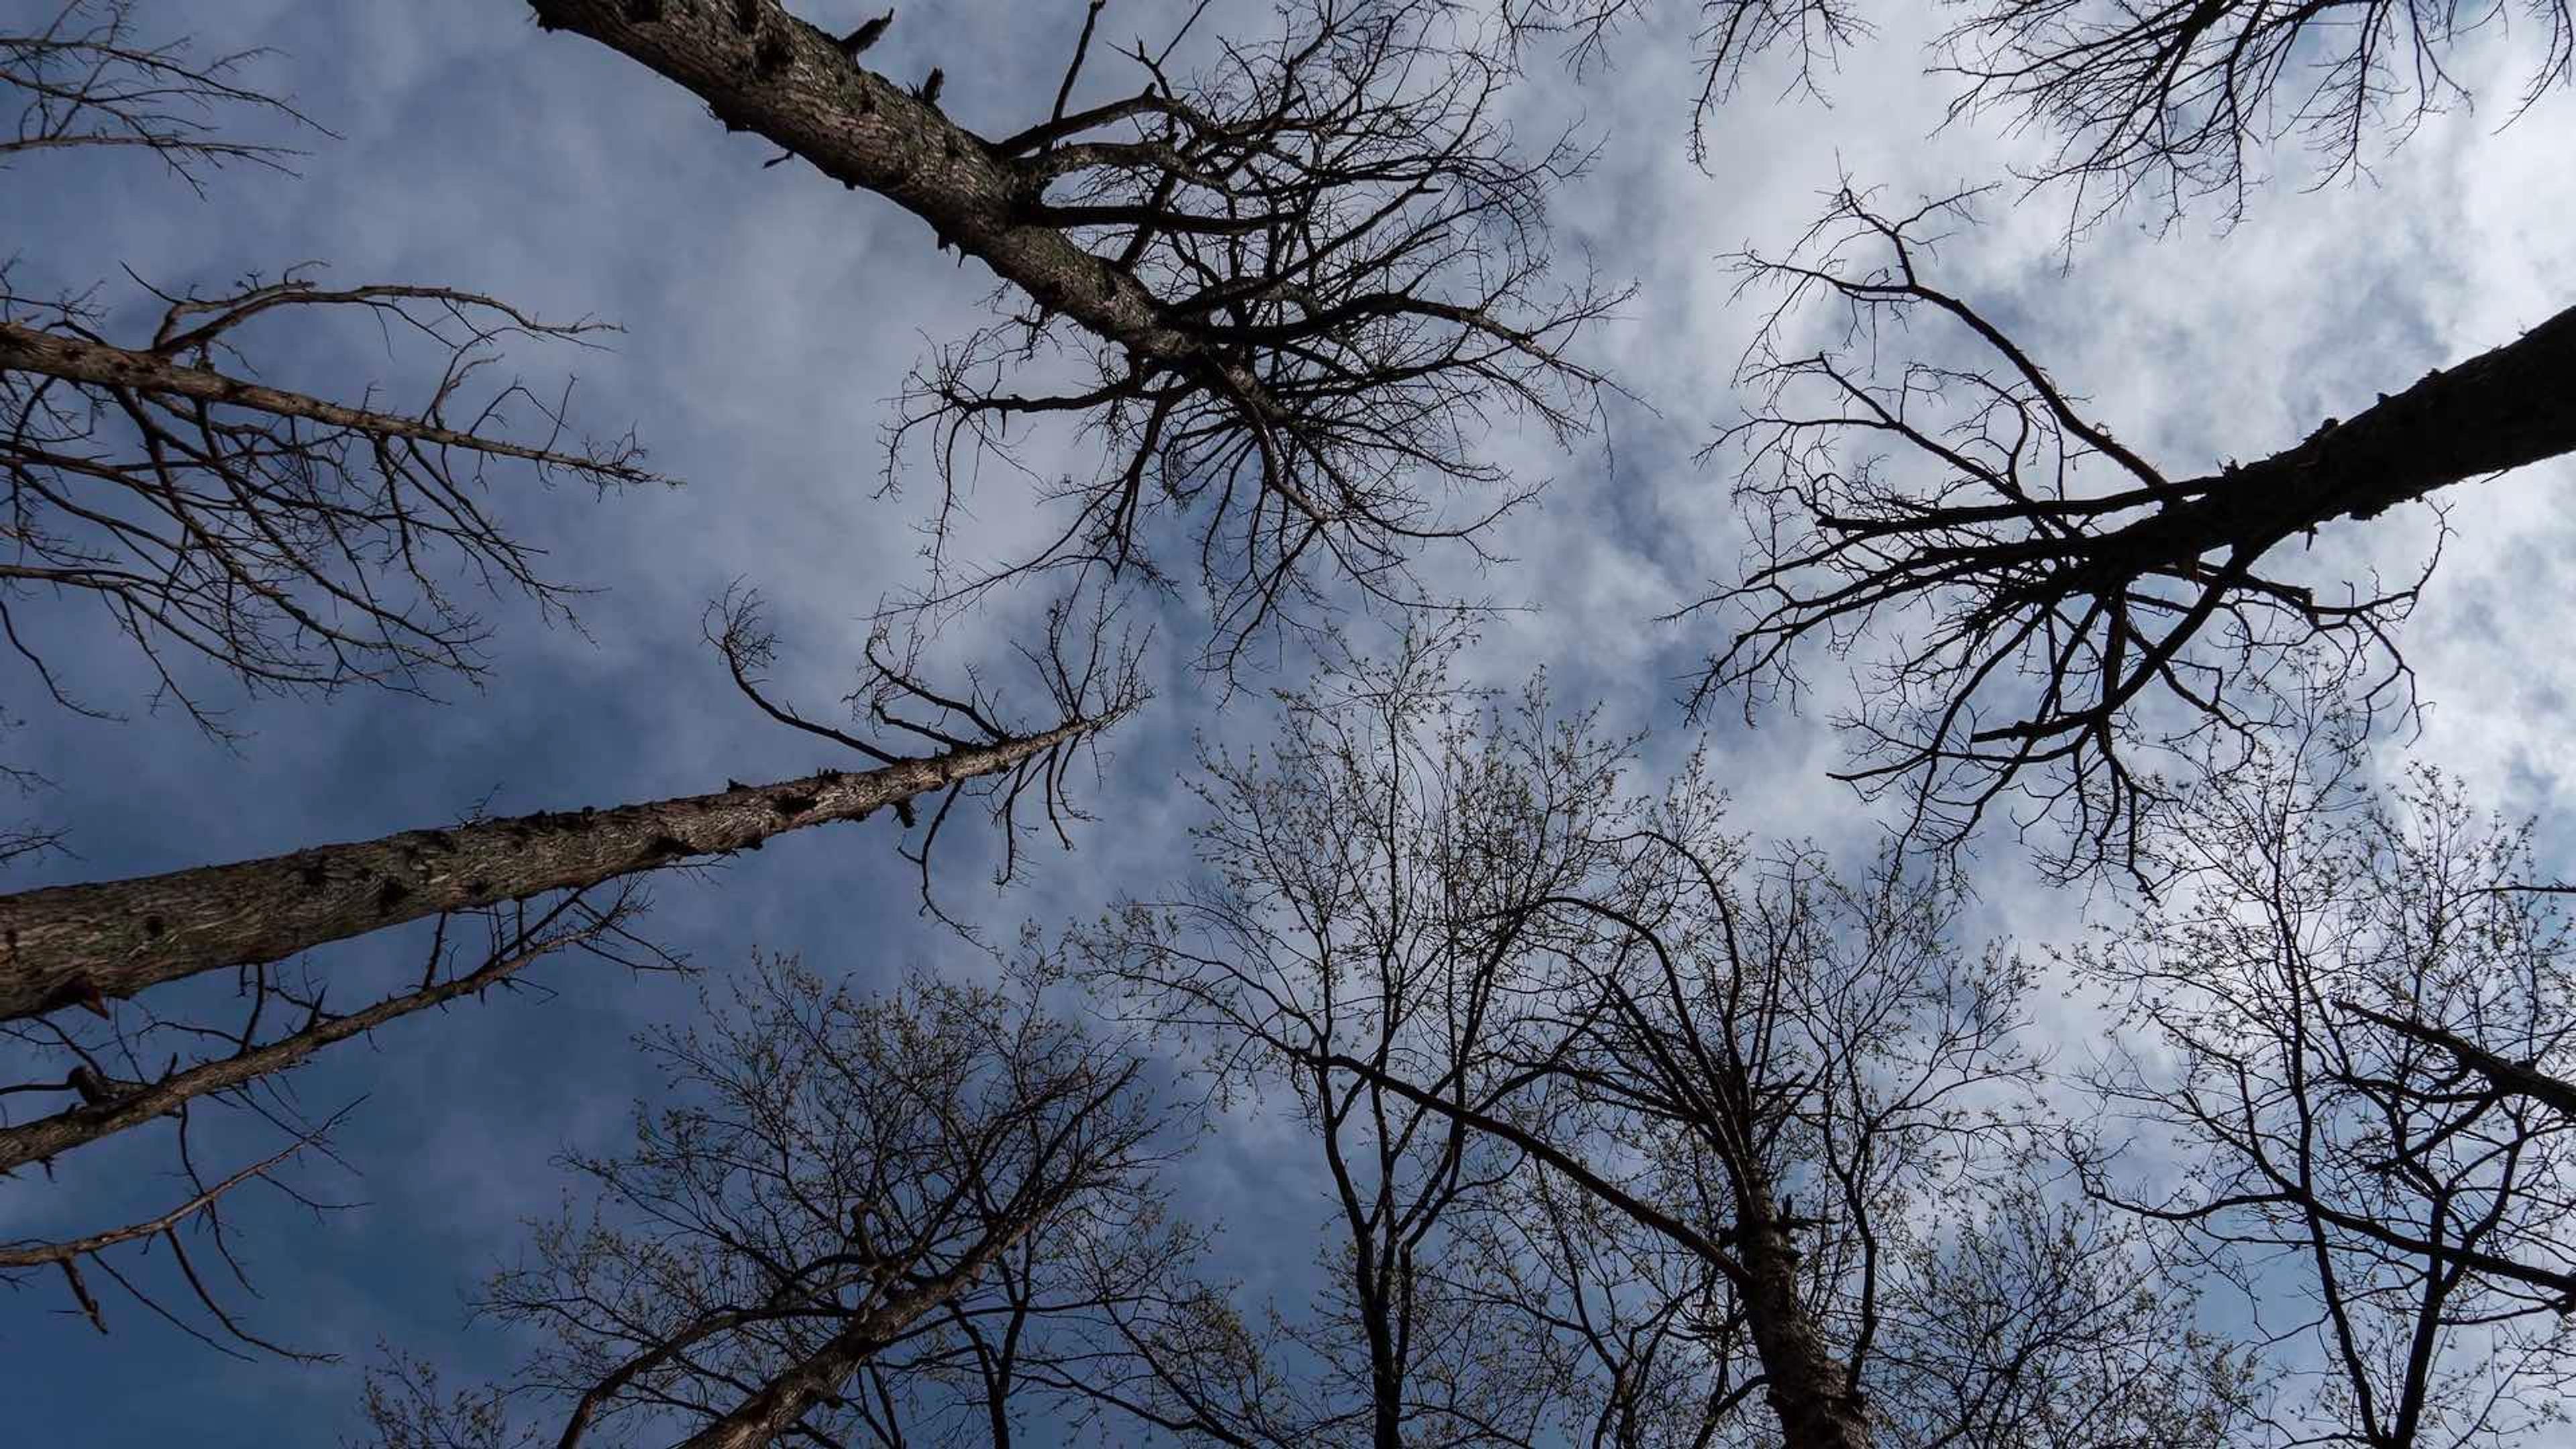 A photograph of a group of barren trees taken from a low angle, aimed up towards the sky